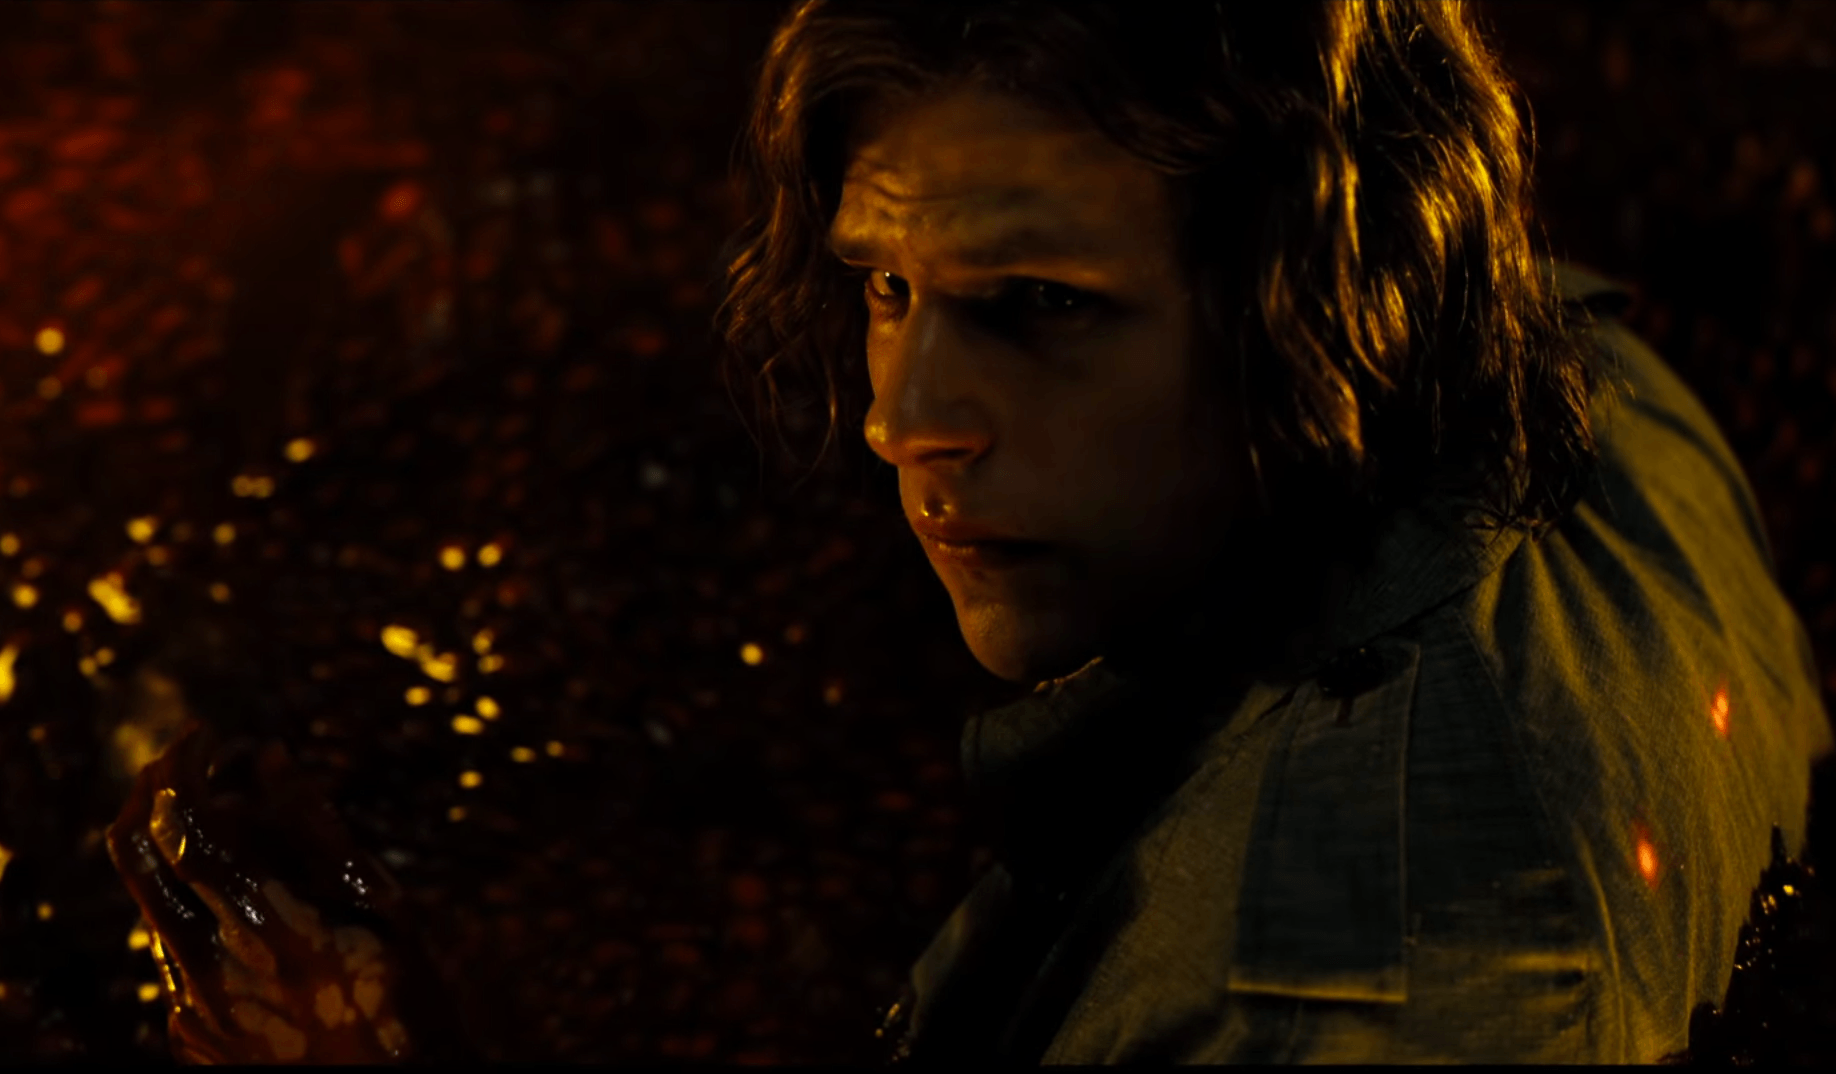 WATCH: ‘Batman v Superman’ deleted scene shows clues to supervillain Darkseid appearance